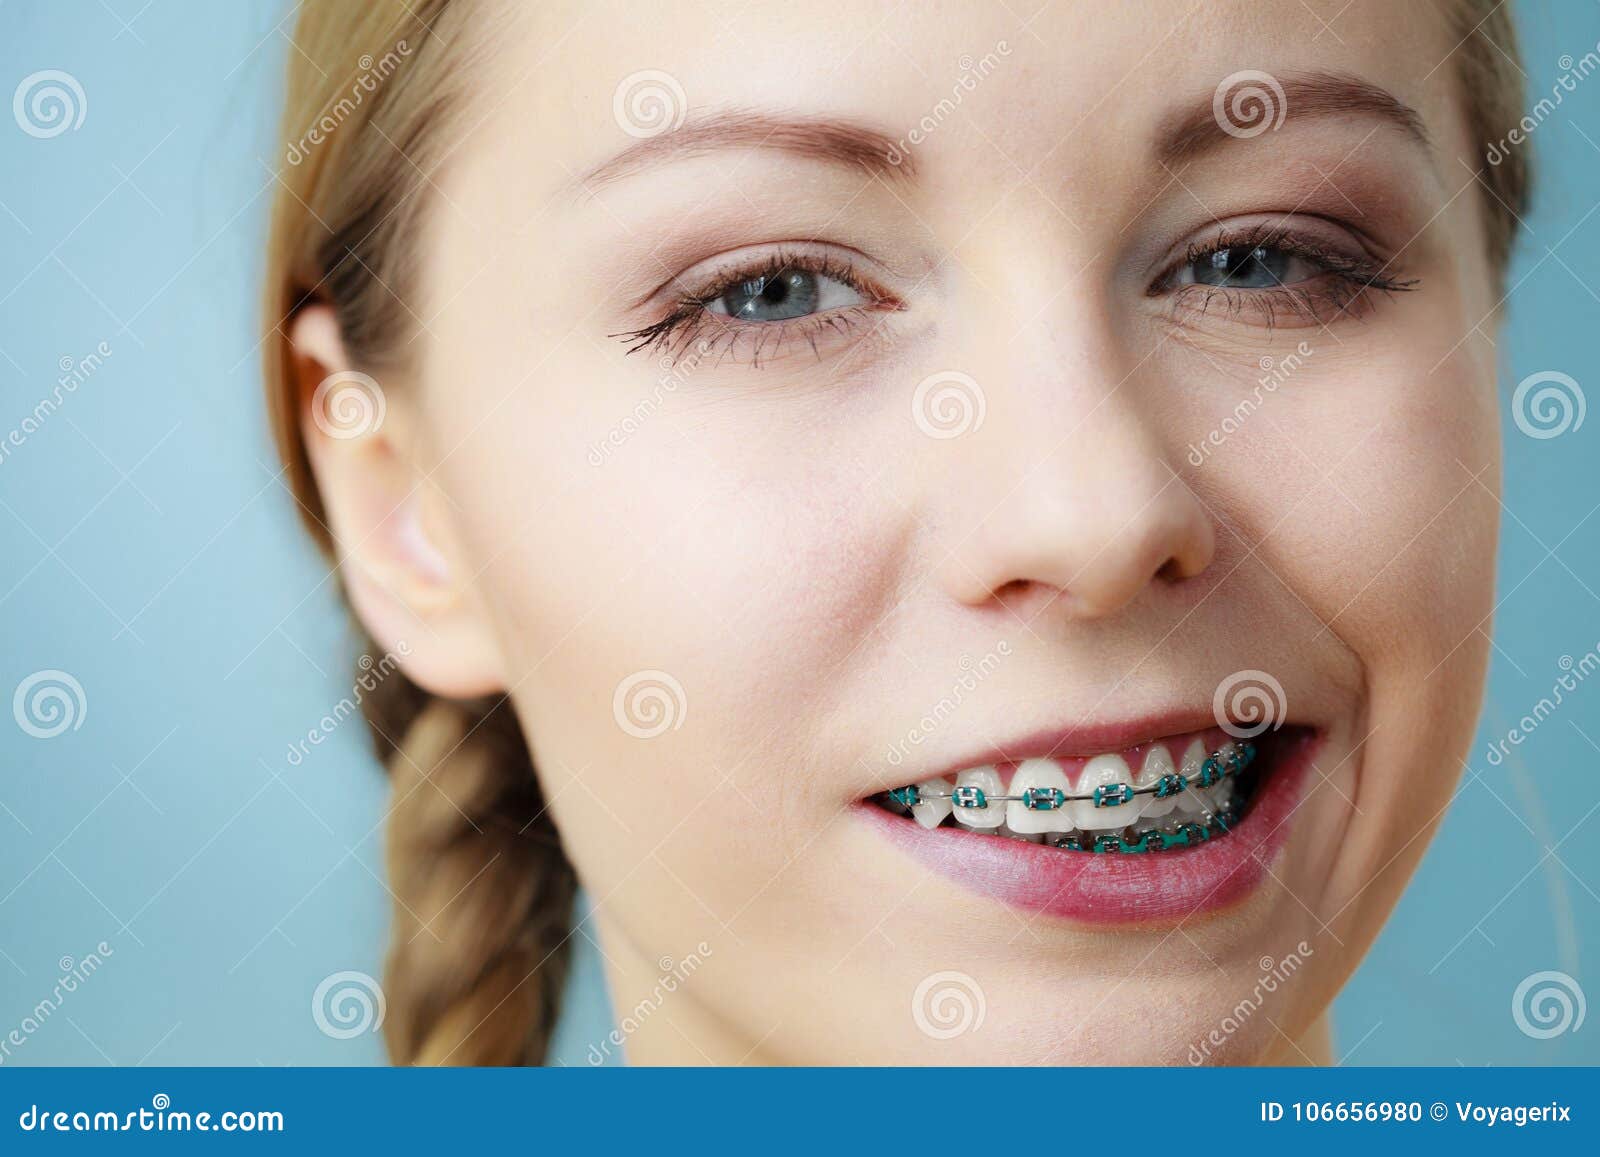 Closeup of Woman Teeth with Braces, Funny Face Stock Photo - Image of ...